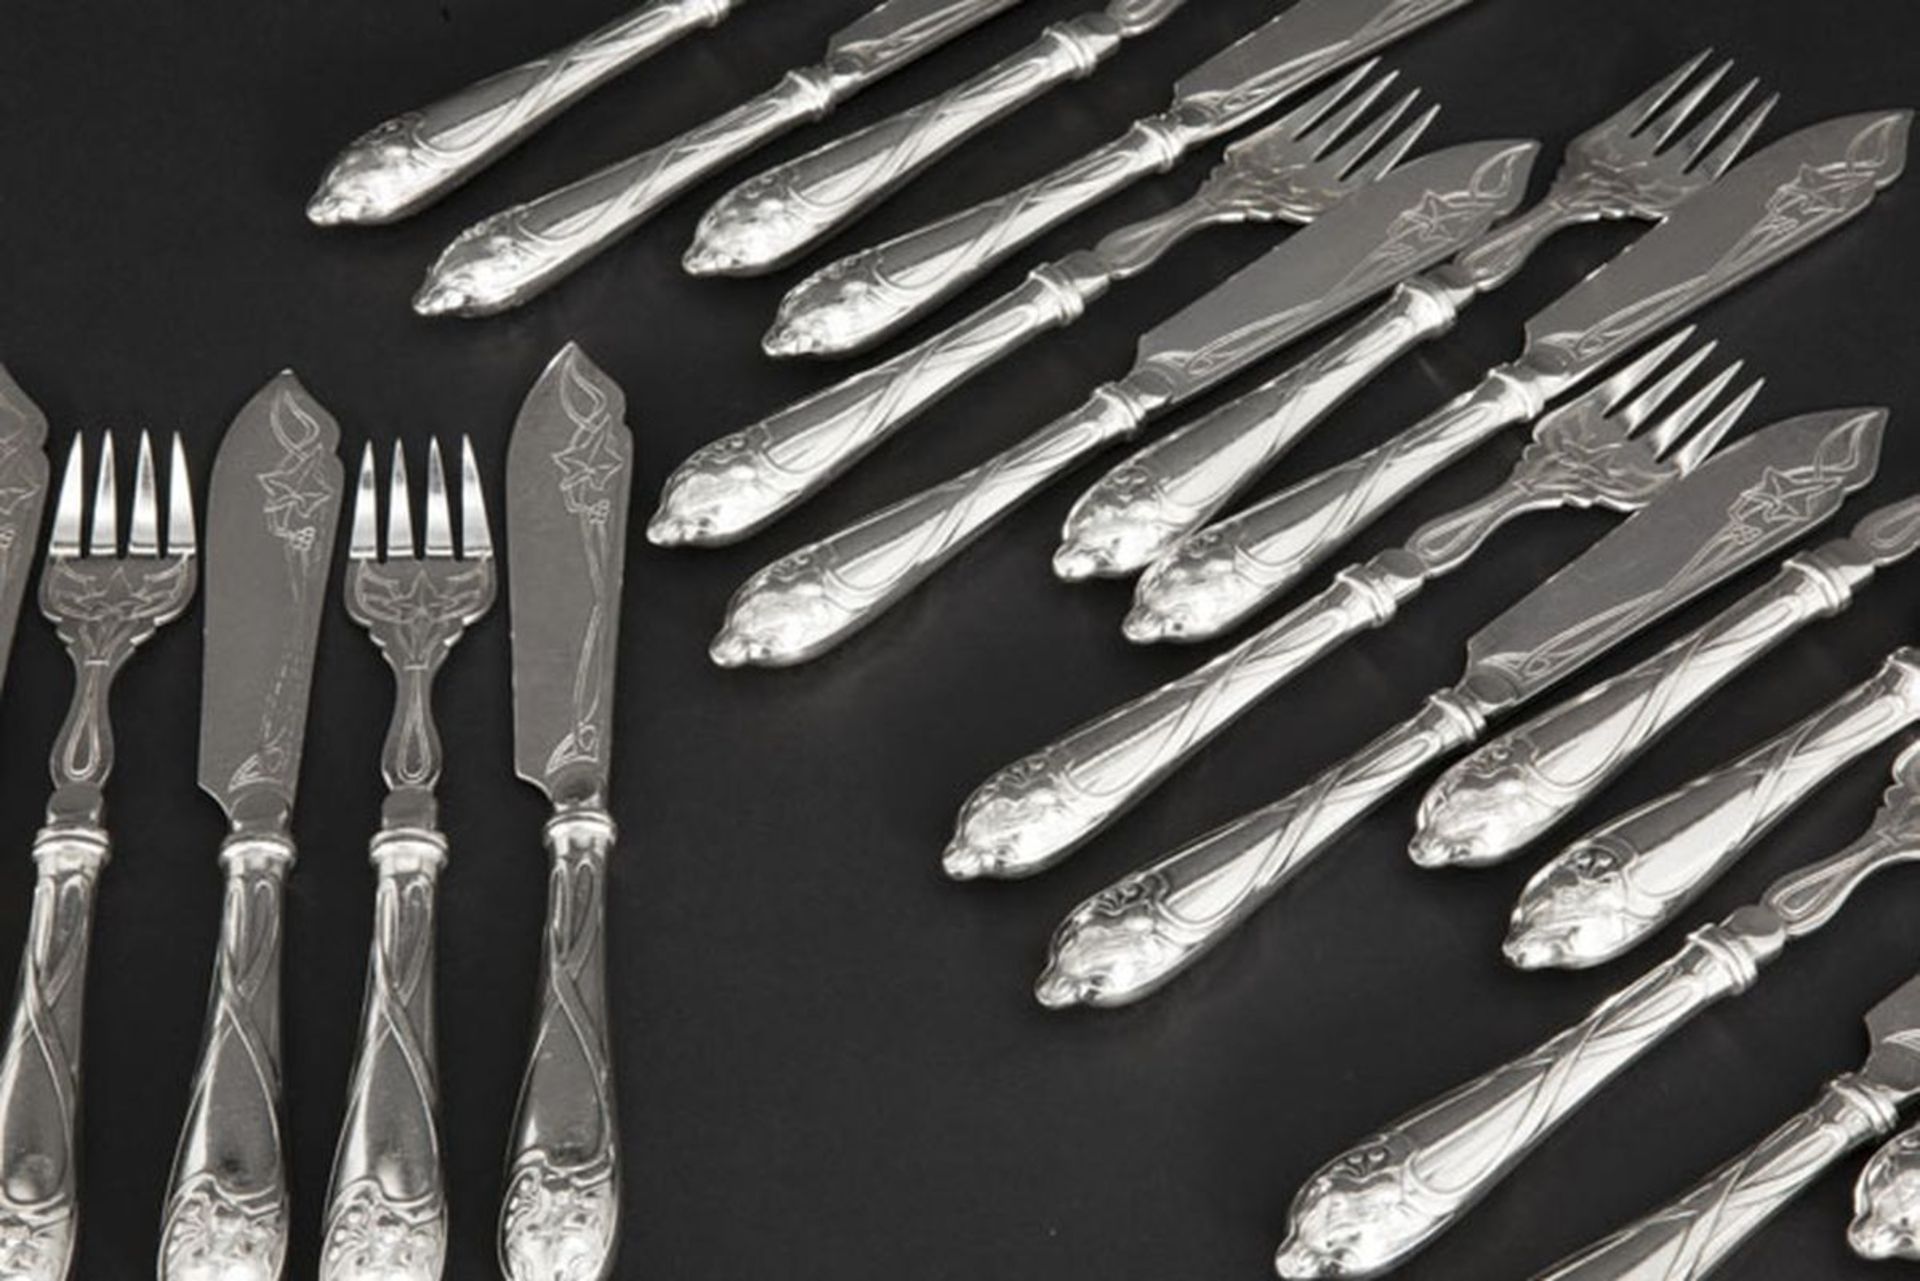 set of 24 pieces "WMF" Art Nouveau cutlery with whiplash ornamentation - marked - [...] - Image 2 of 2